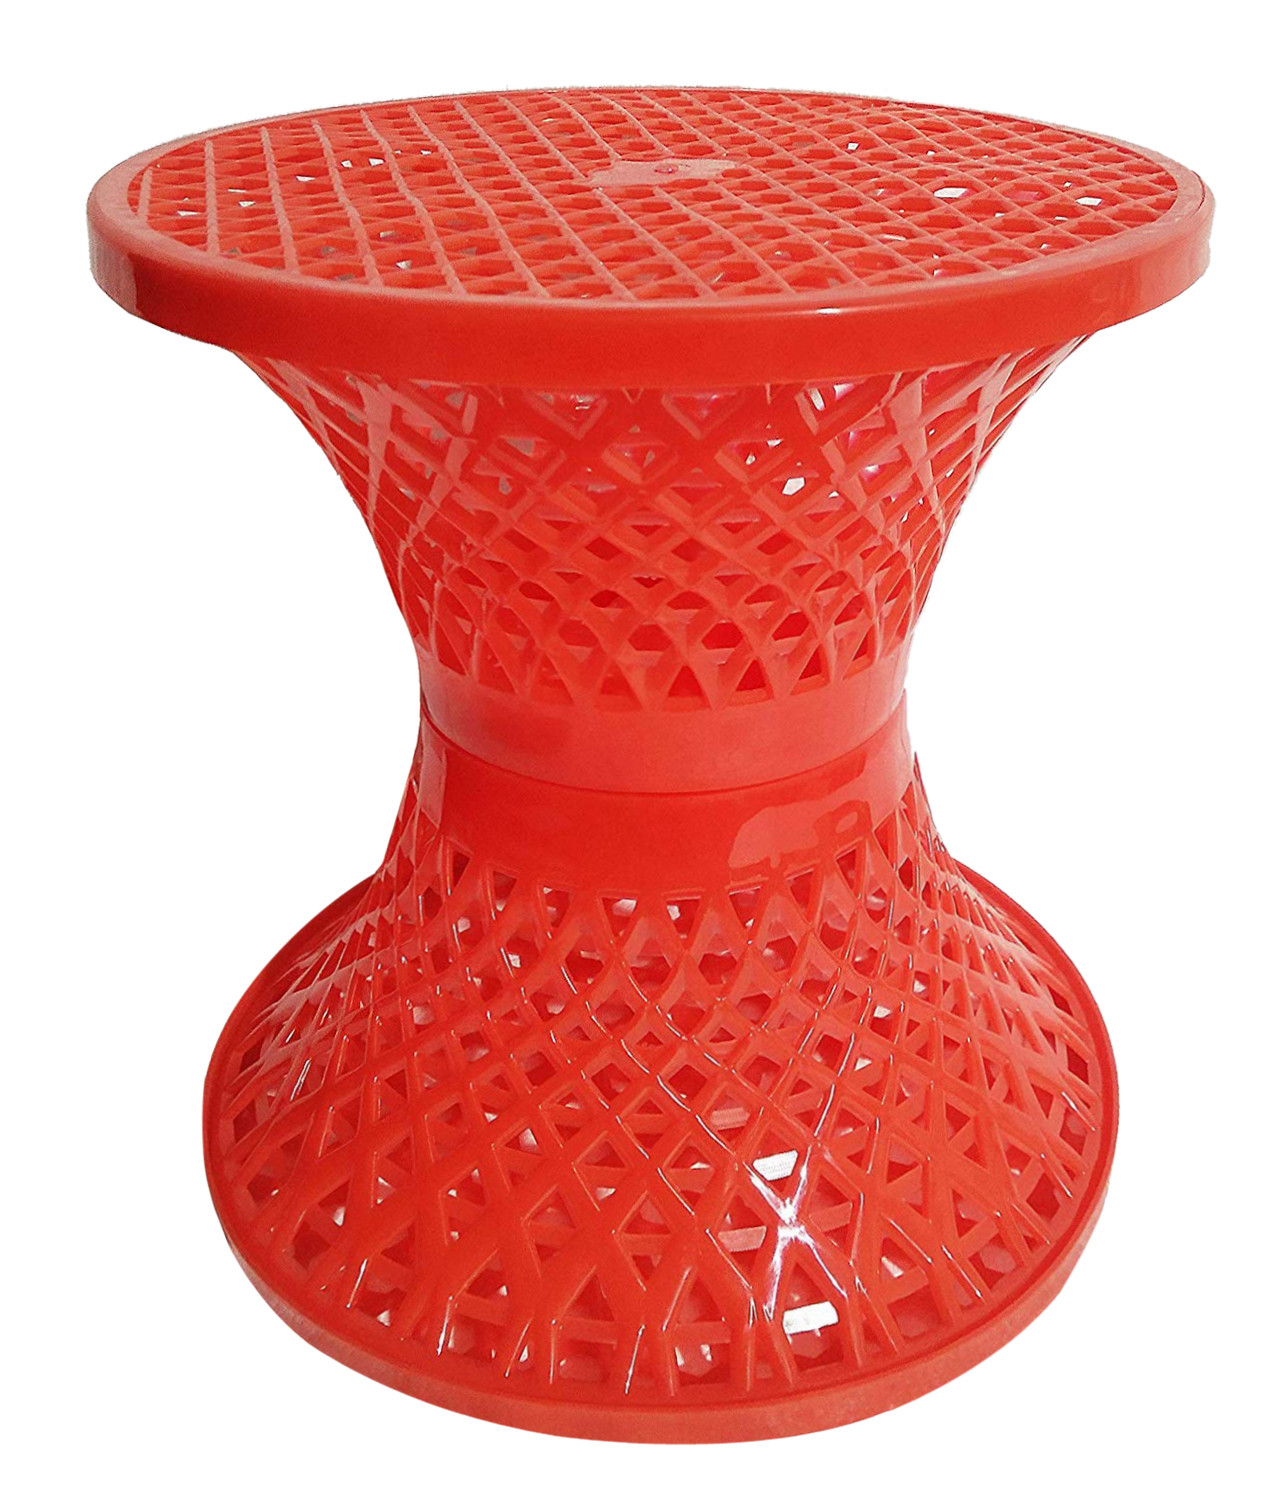 Kuber Industries Mesh Design Both Sided Plastic Sitting Stool, Planter Stand, Sidetable For Living Room, Bed Room, Garden in Damroo Style- Pack of 2 (Orange & Brown)